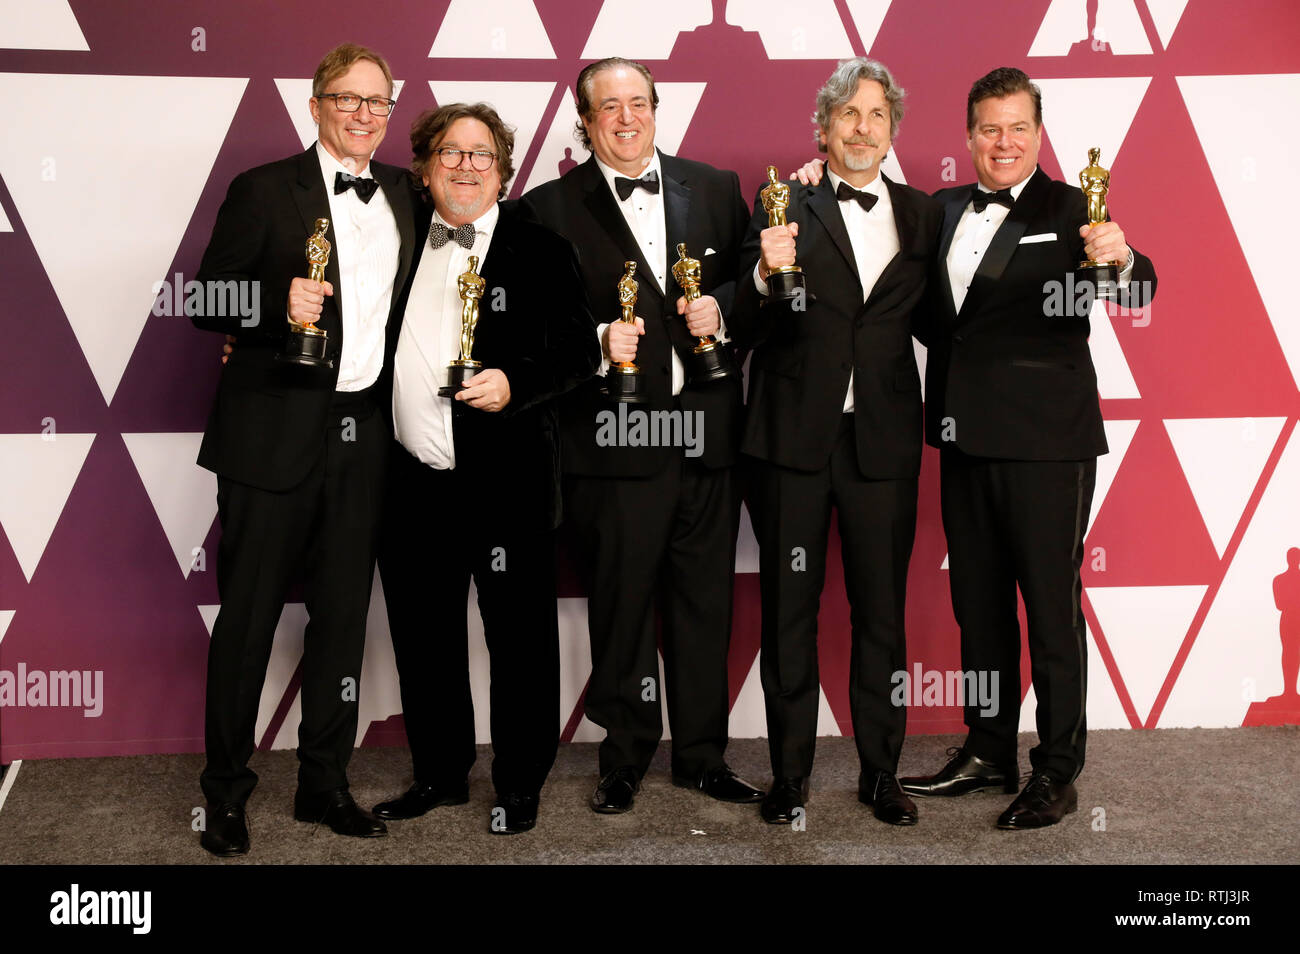 Jim Burke, Charles B. Wessler, Nick Vallelonga, Peter Farrelly, and Brian Currie, winners of Best Picture for 'Green Book,' pose in the press room at the 91st Annual Academy Awards at Hollywood and Highland Center on February 24, 2019 in Hollywood, California. Stock Photo